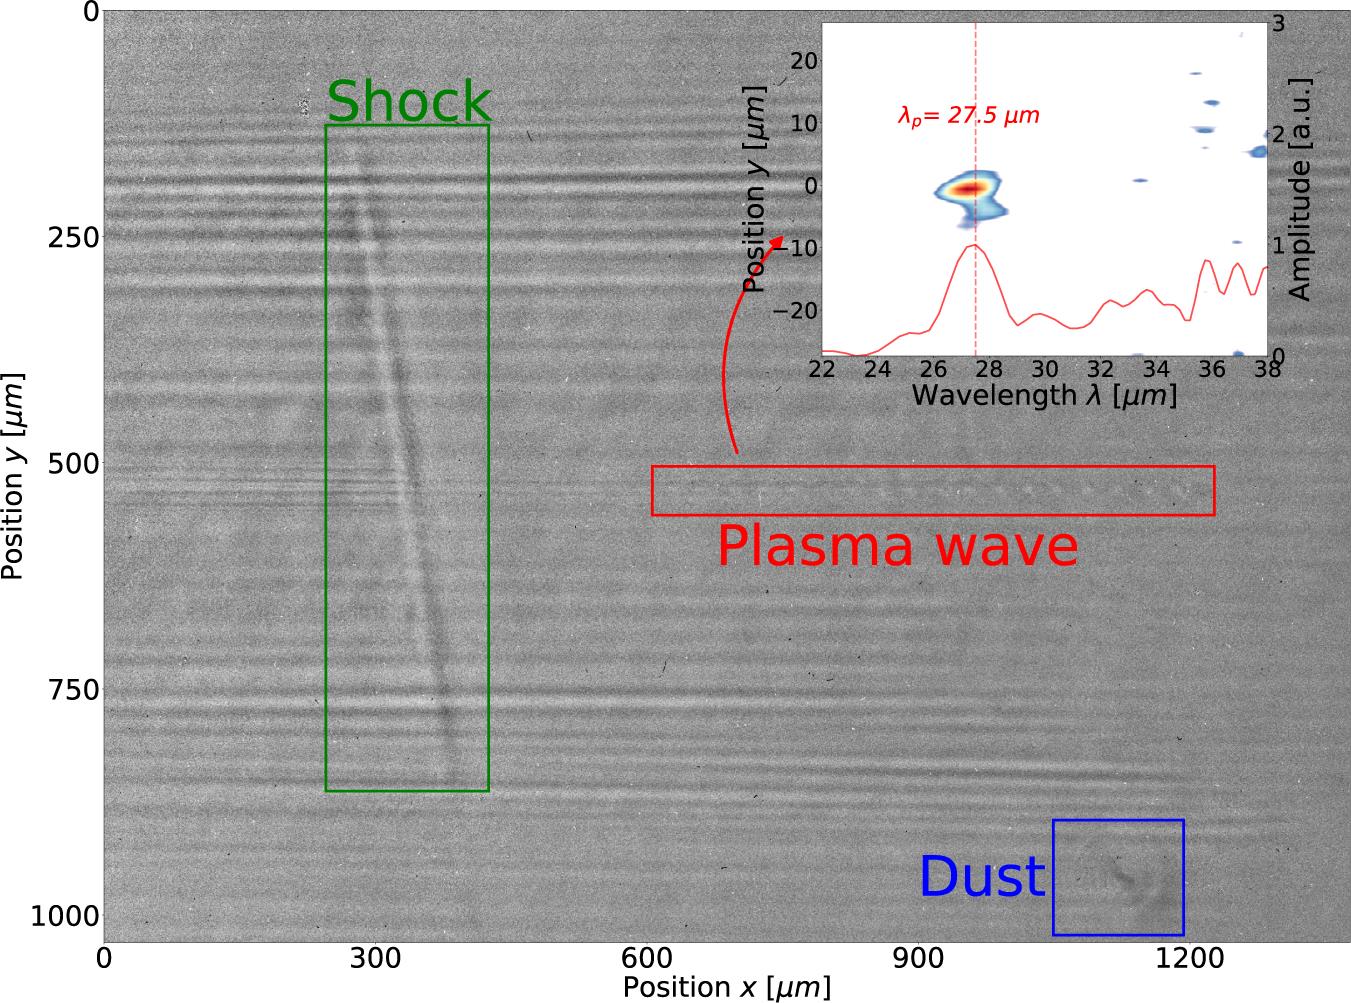 An example: the plasma wave, the shock and the diffraction pattern caused by dust are found by the object detector and located with bounding boxes. More shadowgrams with different shock positions, without shocks, with multiple dust patterns and with overlapping objects are attached in the supplementary material. The subplot on the top right is the Fourier transform of the region within the bounding box of the plasma wave (red). The plasma oscillation wavelength is estimated by integrating along the vertical axis, which peaks at 27.5 μm.